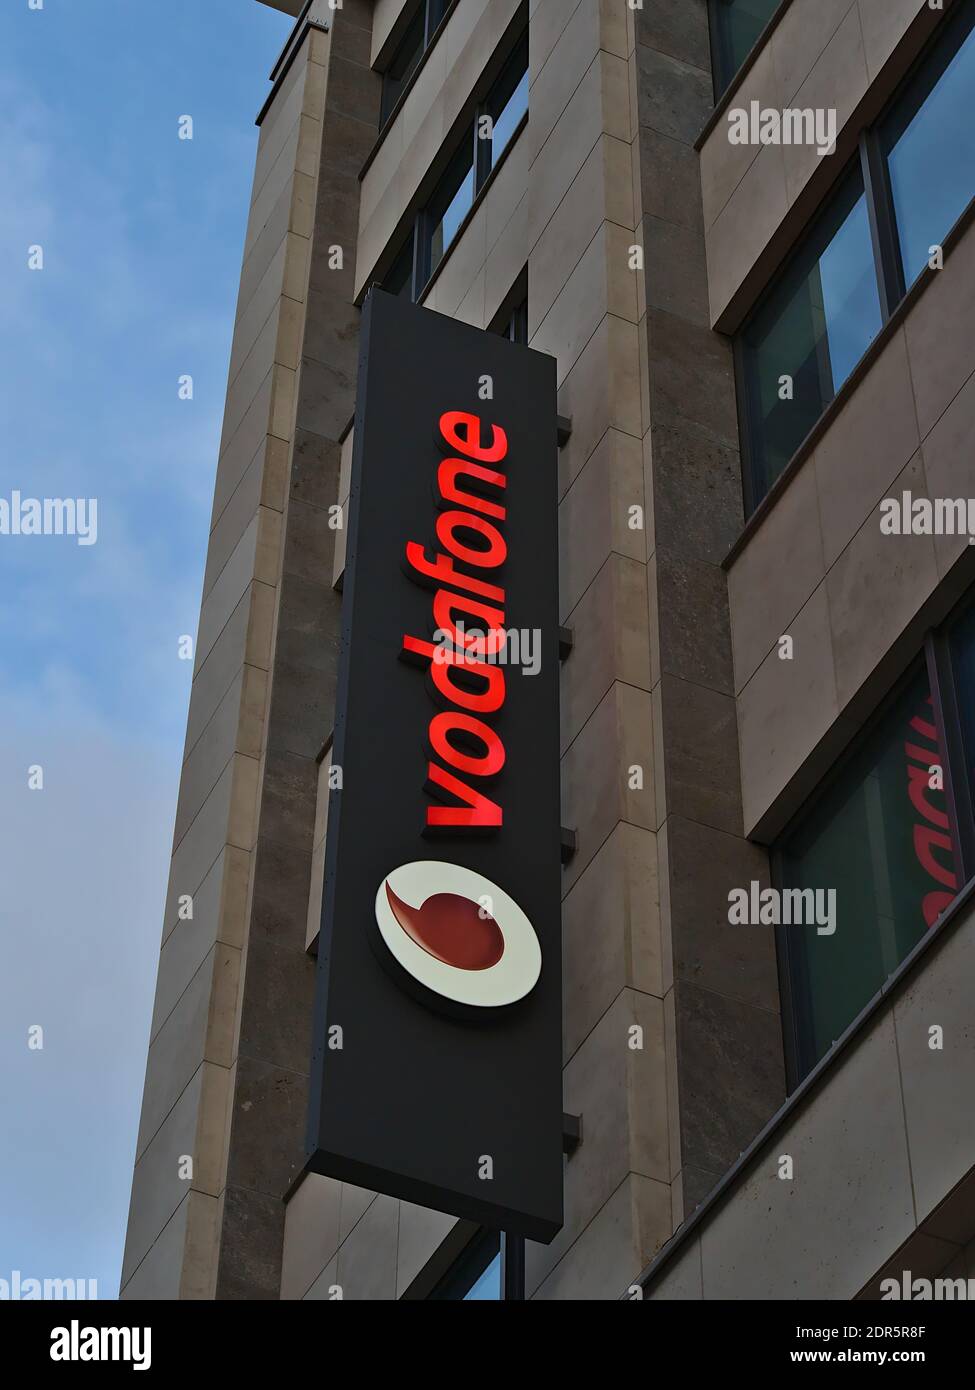 Big Vodafone (telecommunications business) advertising sign with company logo on building facade above branch in shopping street Königstraße. Stock Photo